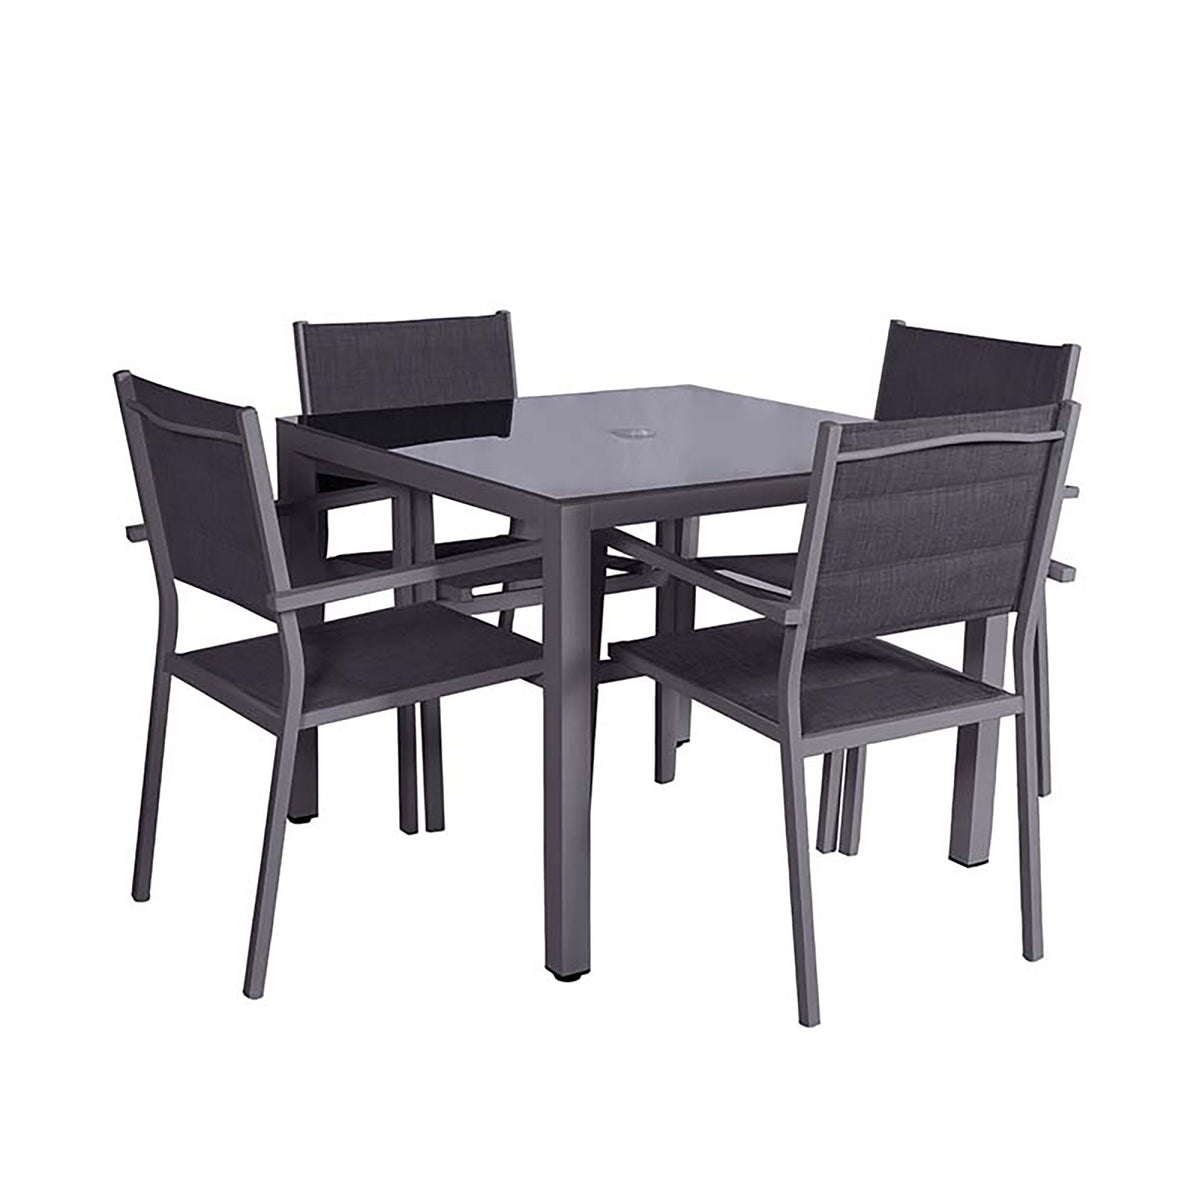 Sorrento 4 Seater Garden Dining Table Set with Parasol - View of table and chairs only